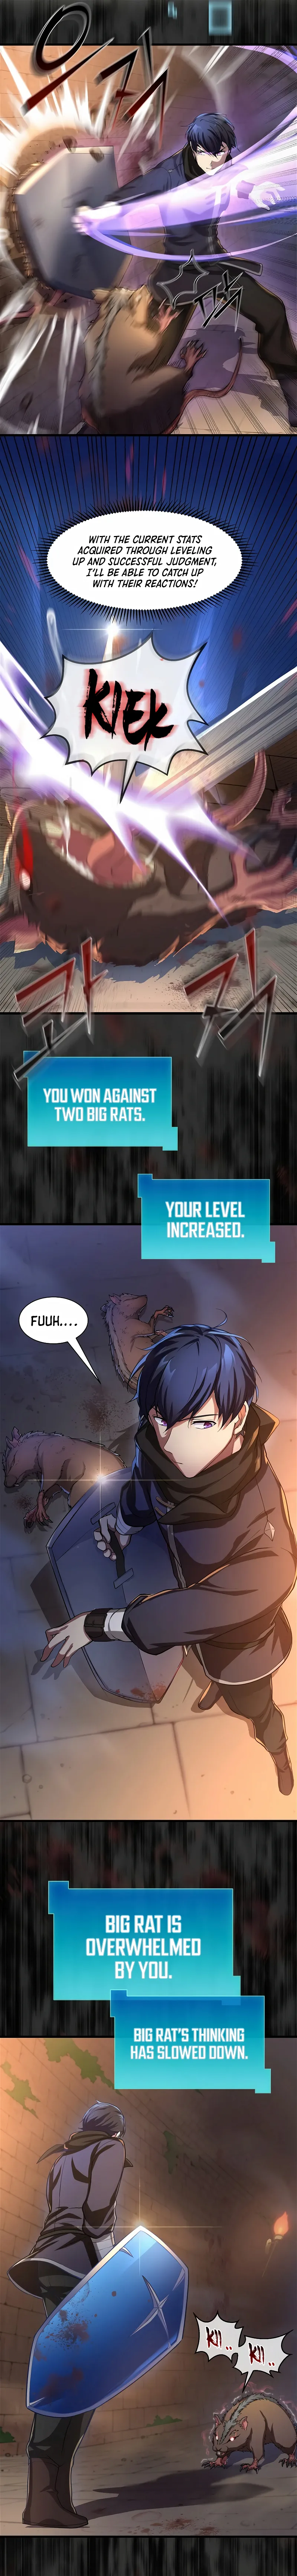 Leveling Up With Skills Chapter 8 page 4